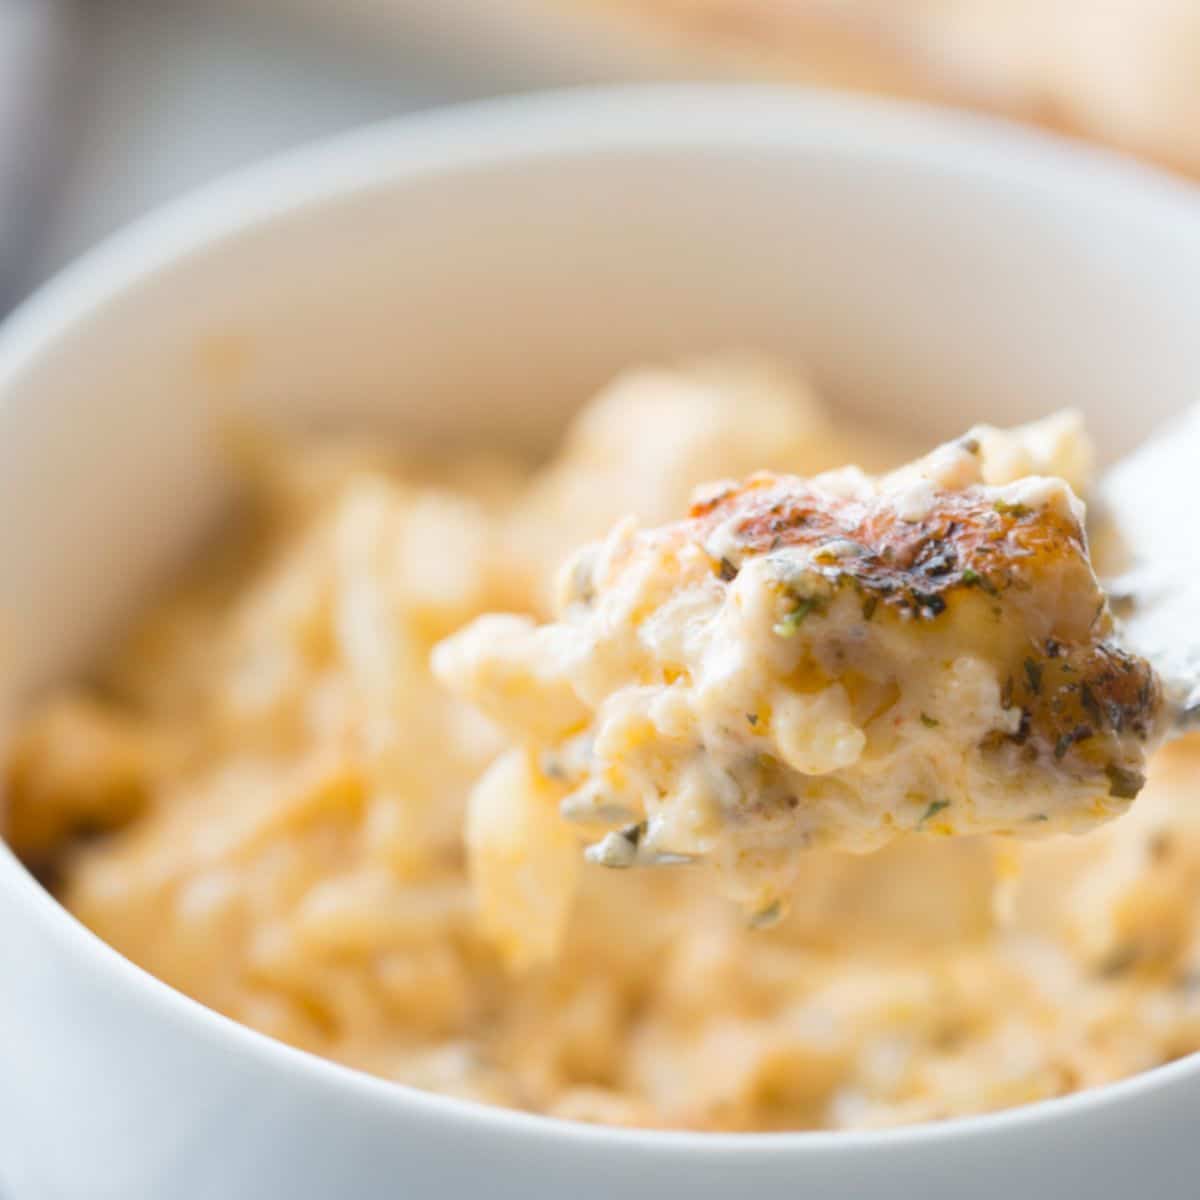 featured image of cauliflower Mac n cheese in a white bowl with a bite on a spoon